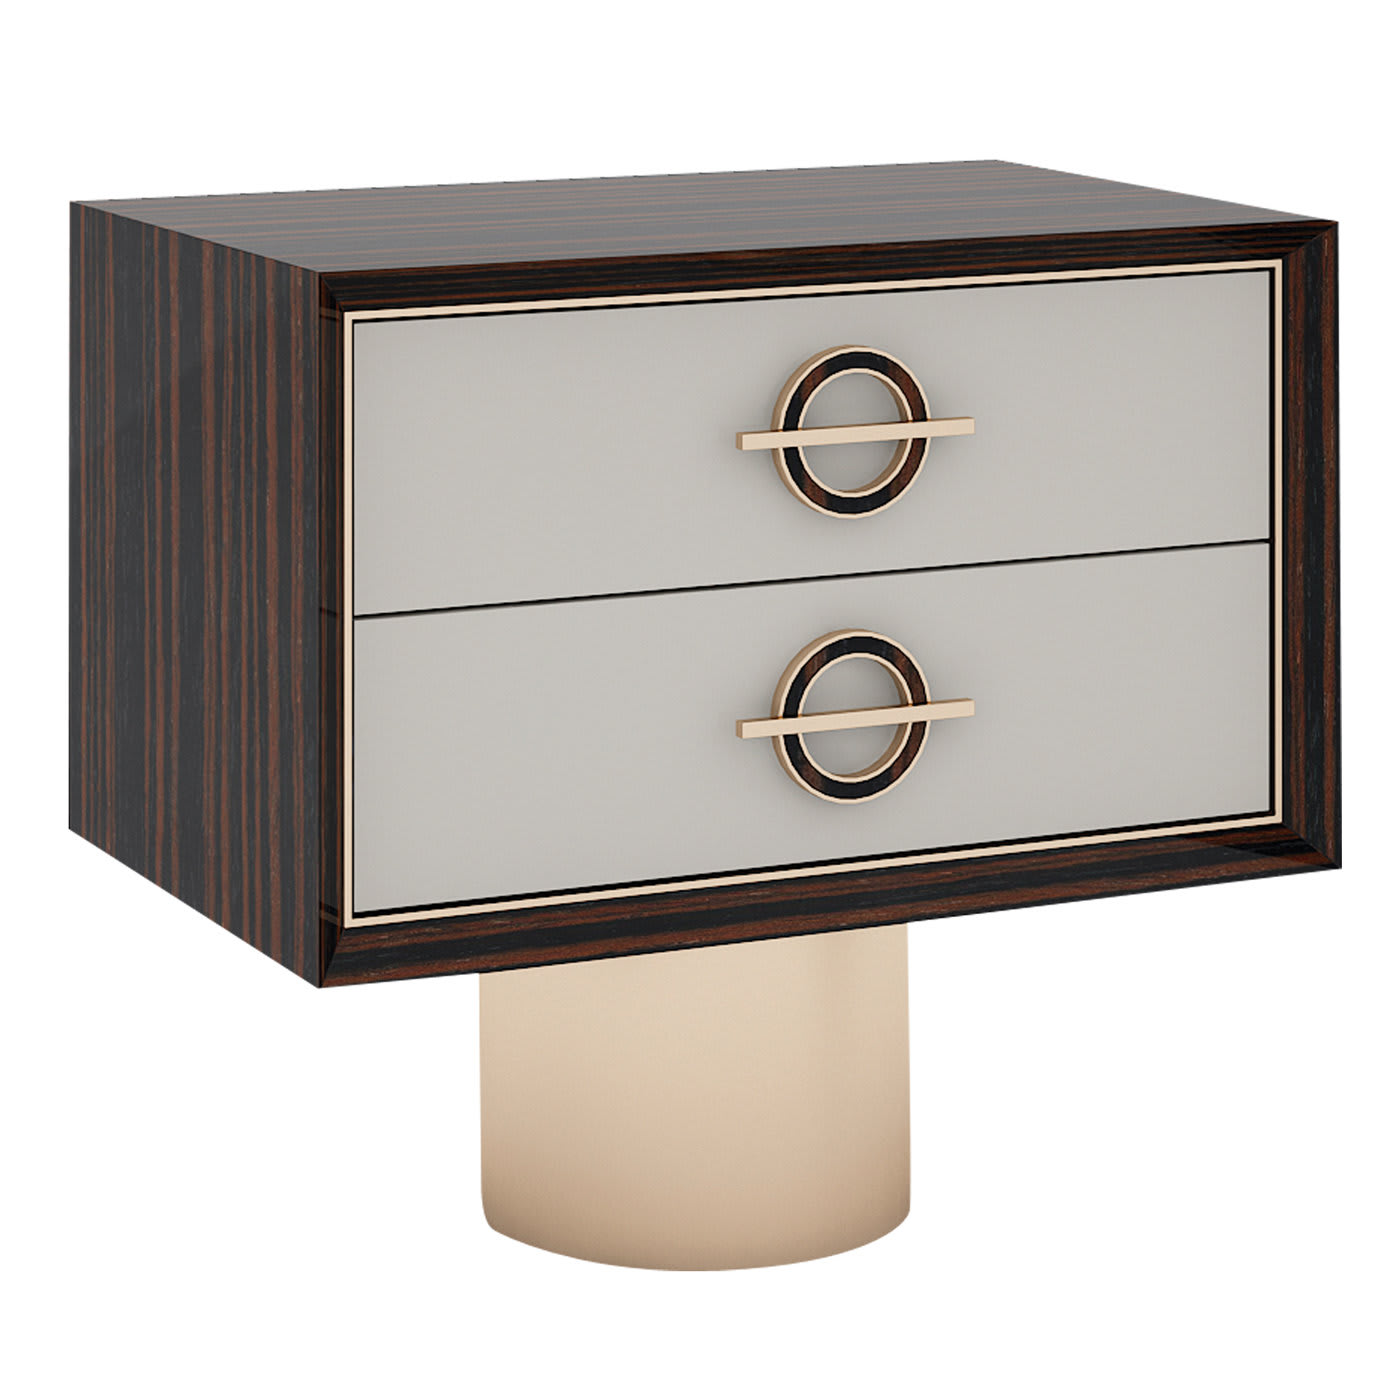 Dylan Nightstand by Giannella Ventura - Inedito